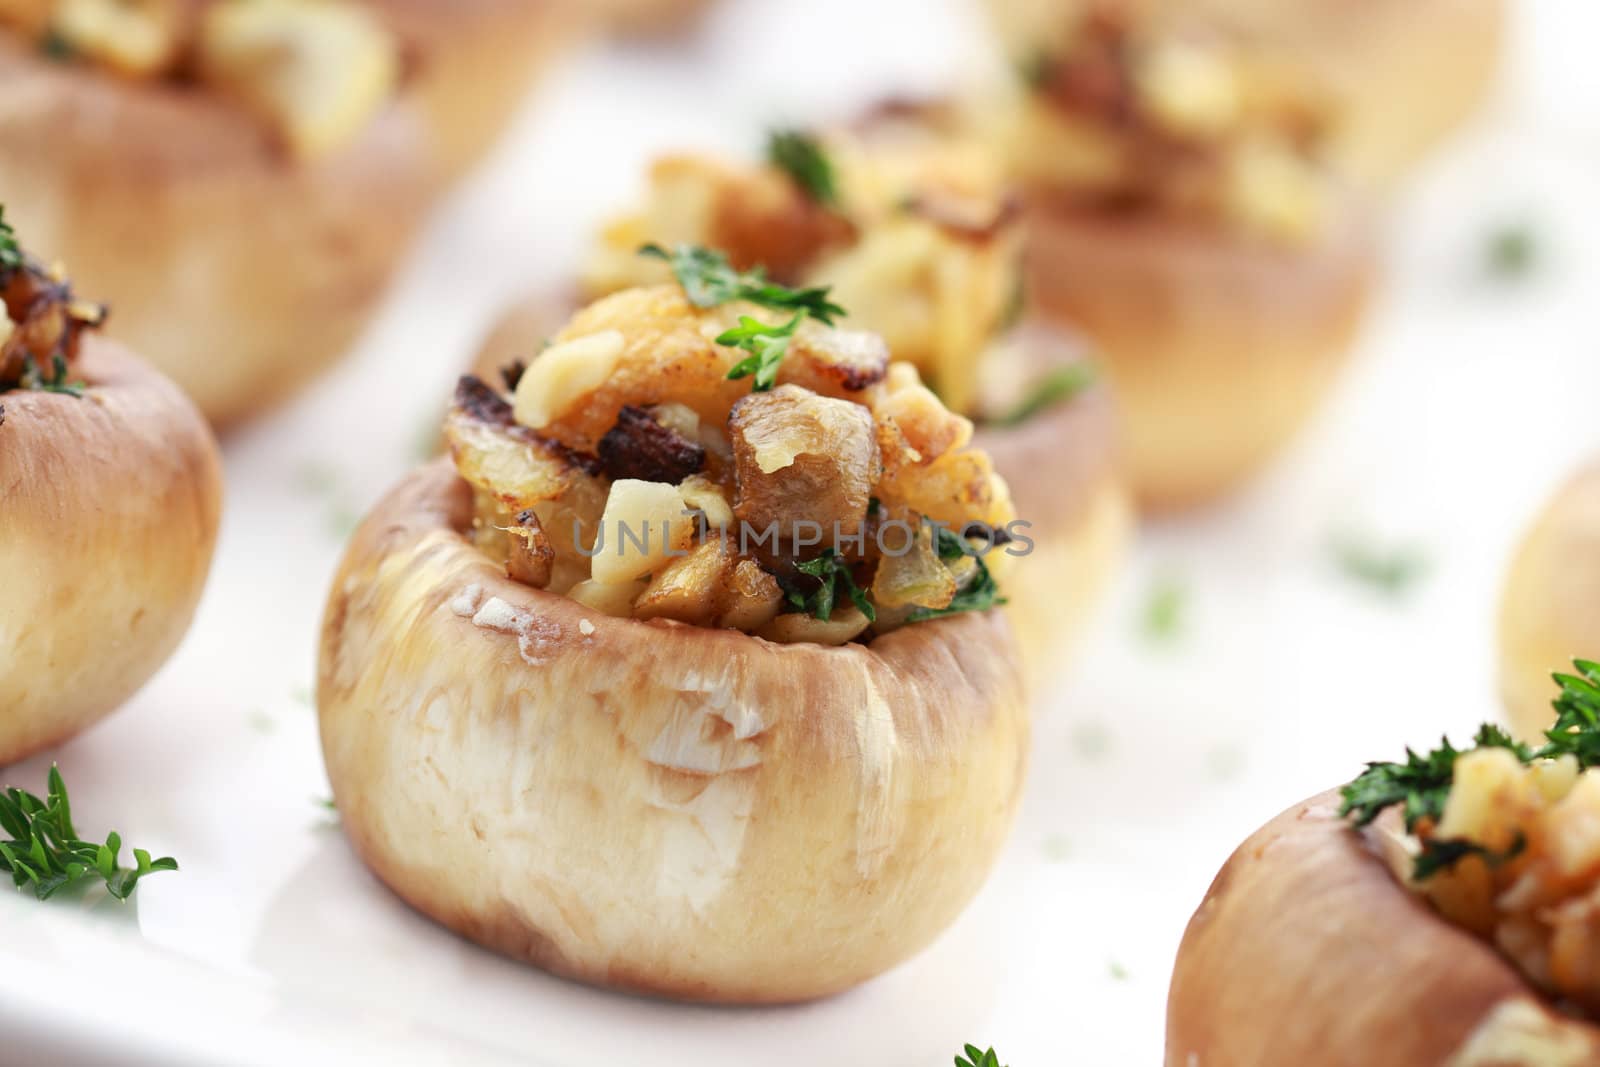 Stuffed mushrooms filled with bread crumbs, cheese, mushroom stems, fresh  parsley,onions and Macadamia nuts. Extreme shallow DOF with selective focus on center mushroom.